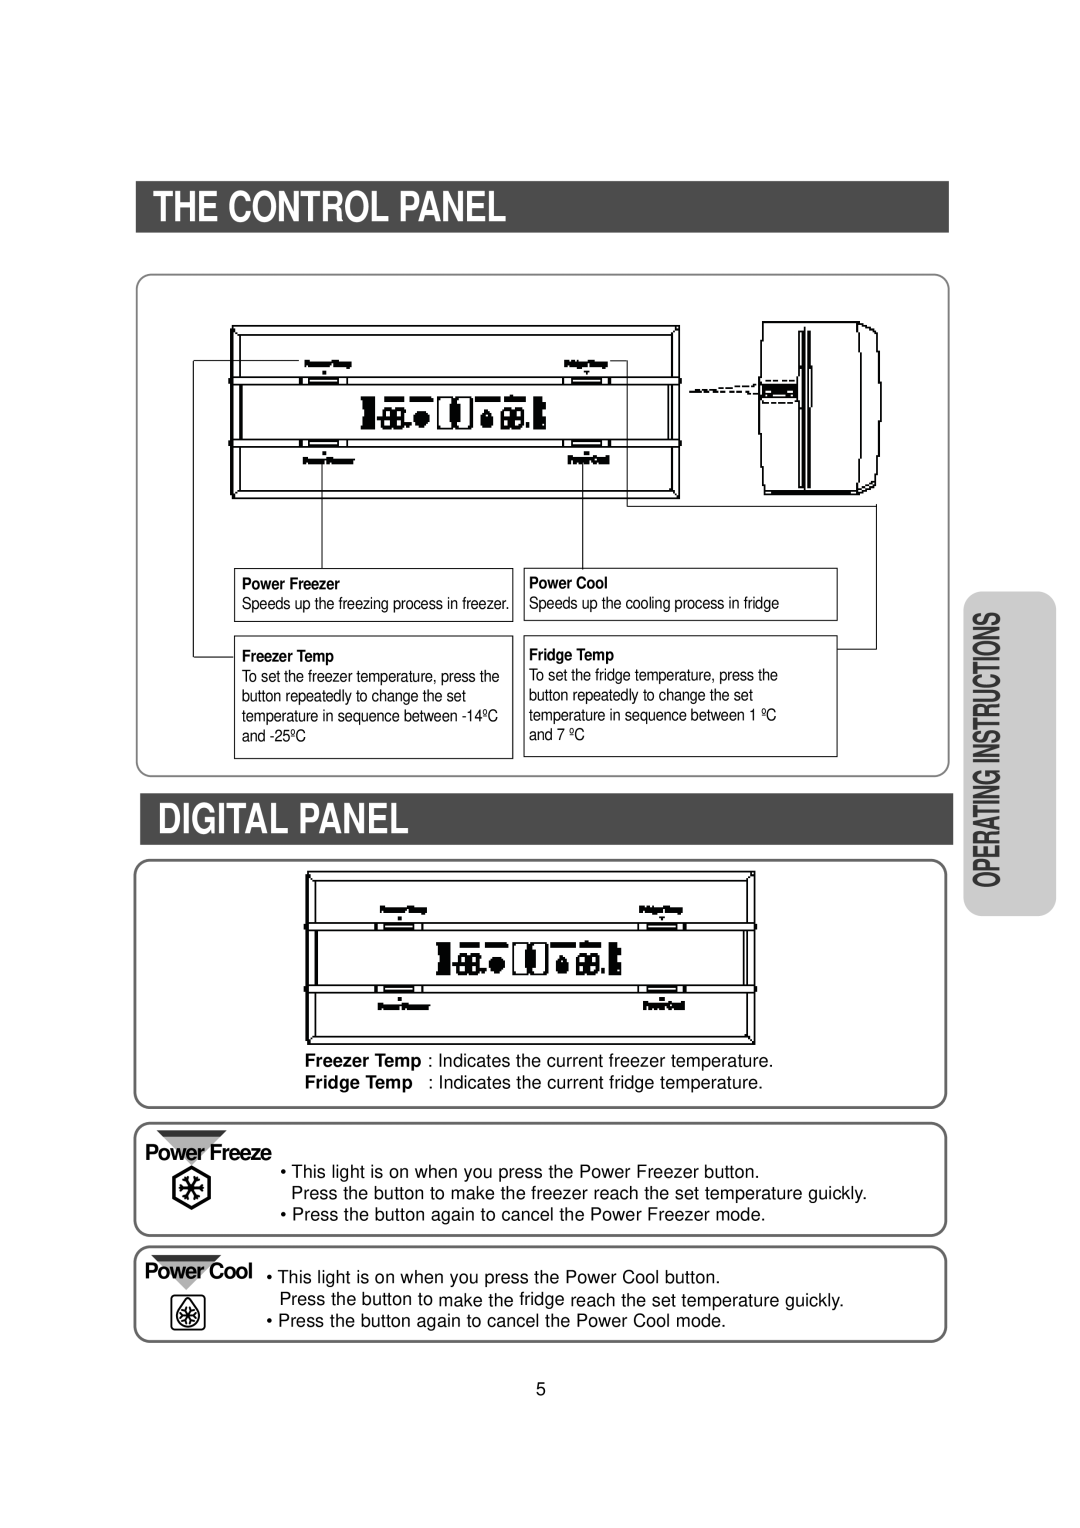 Samsung RS owner manual The Control Panel, Digital Panel, Power Freeze, Instructions, Operating 